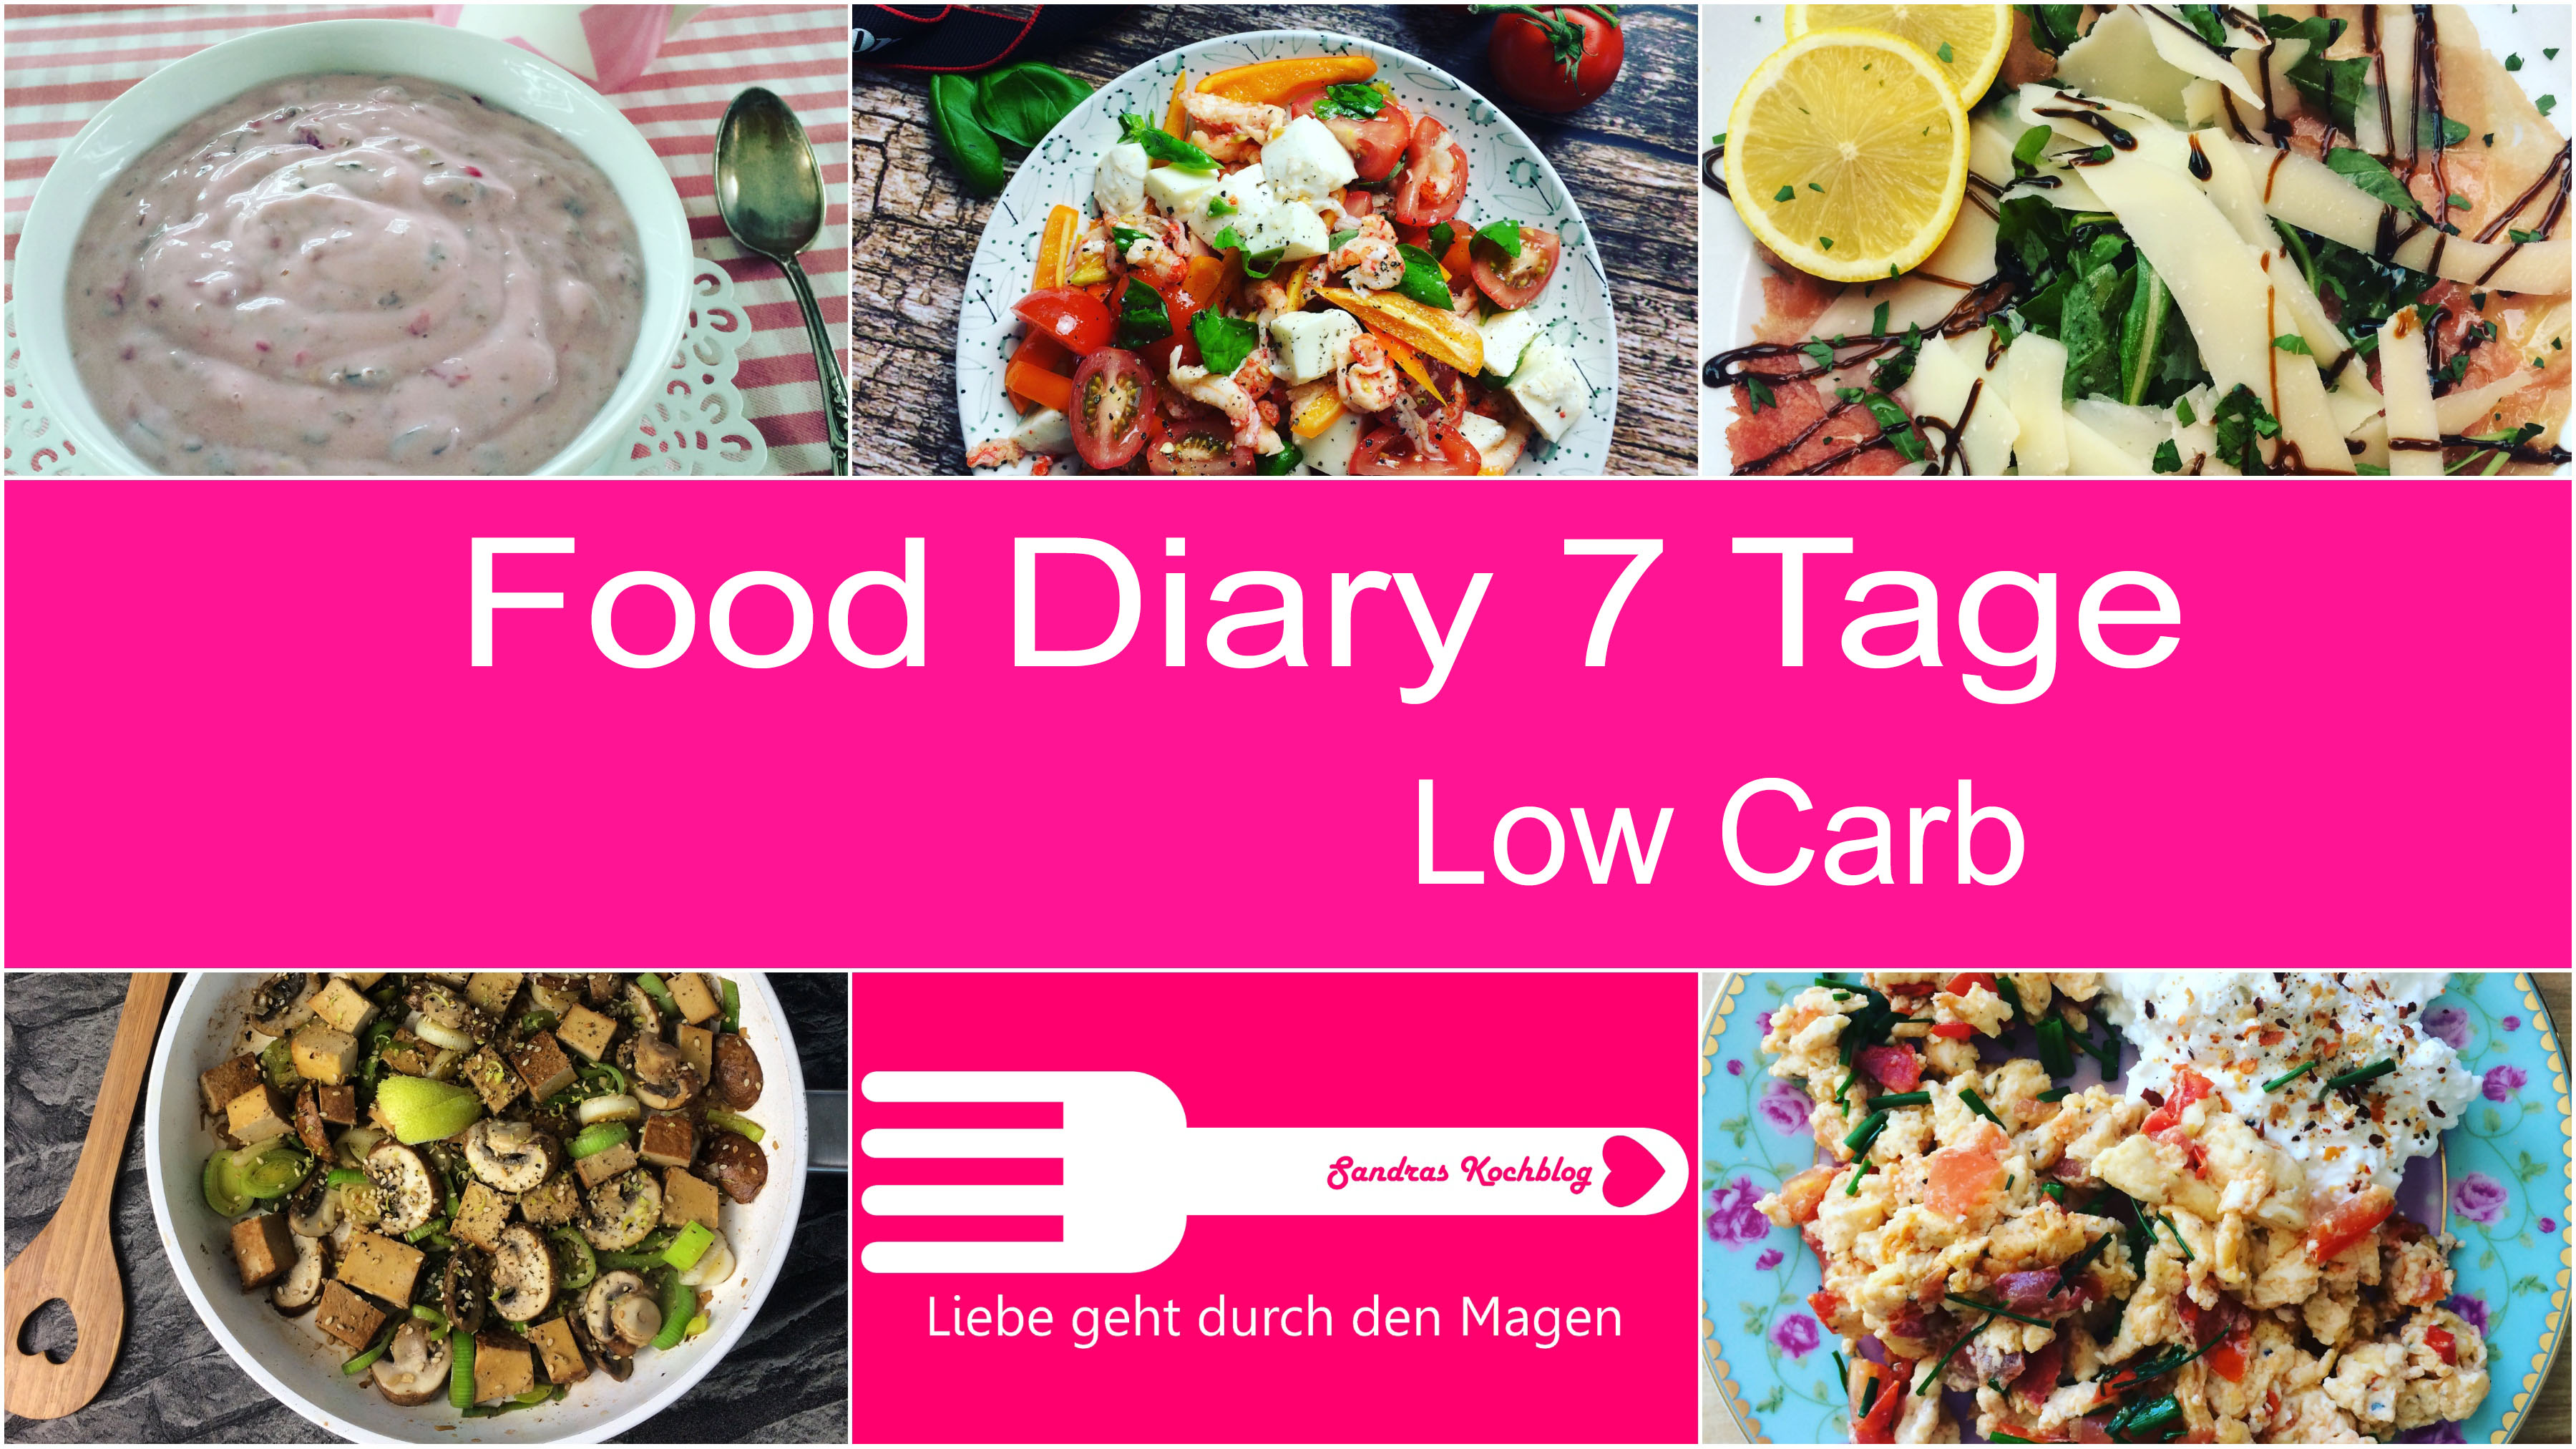 Mein 5. Food Diary